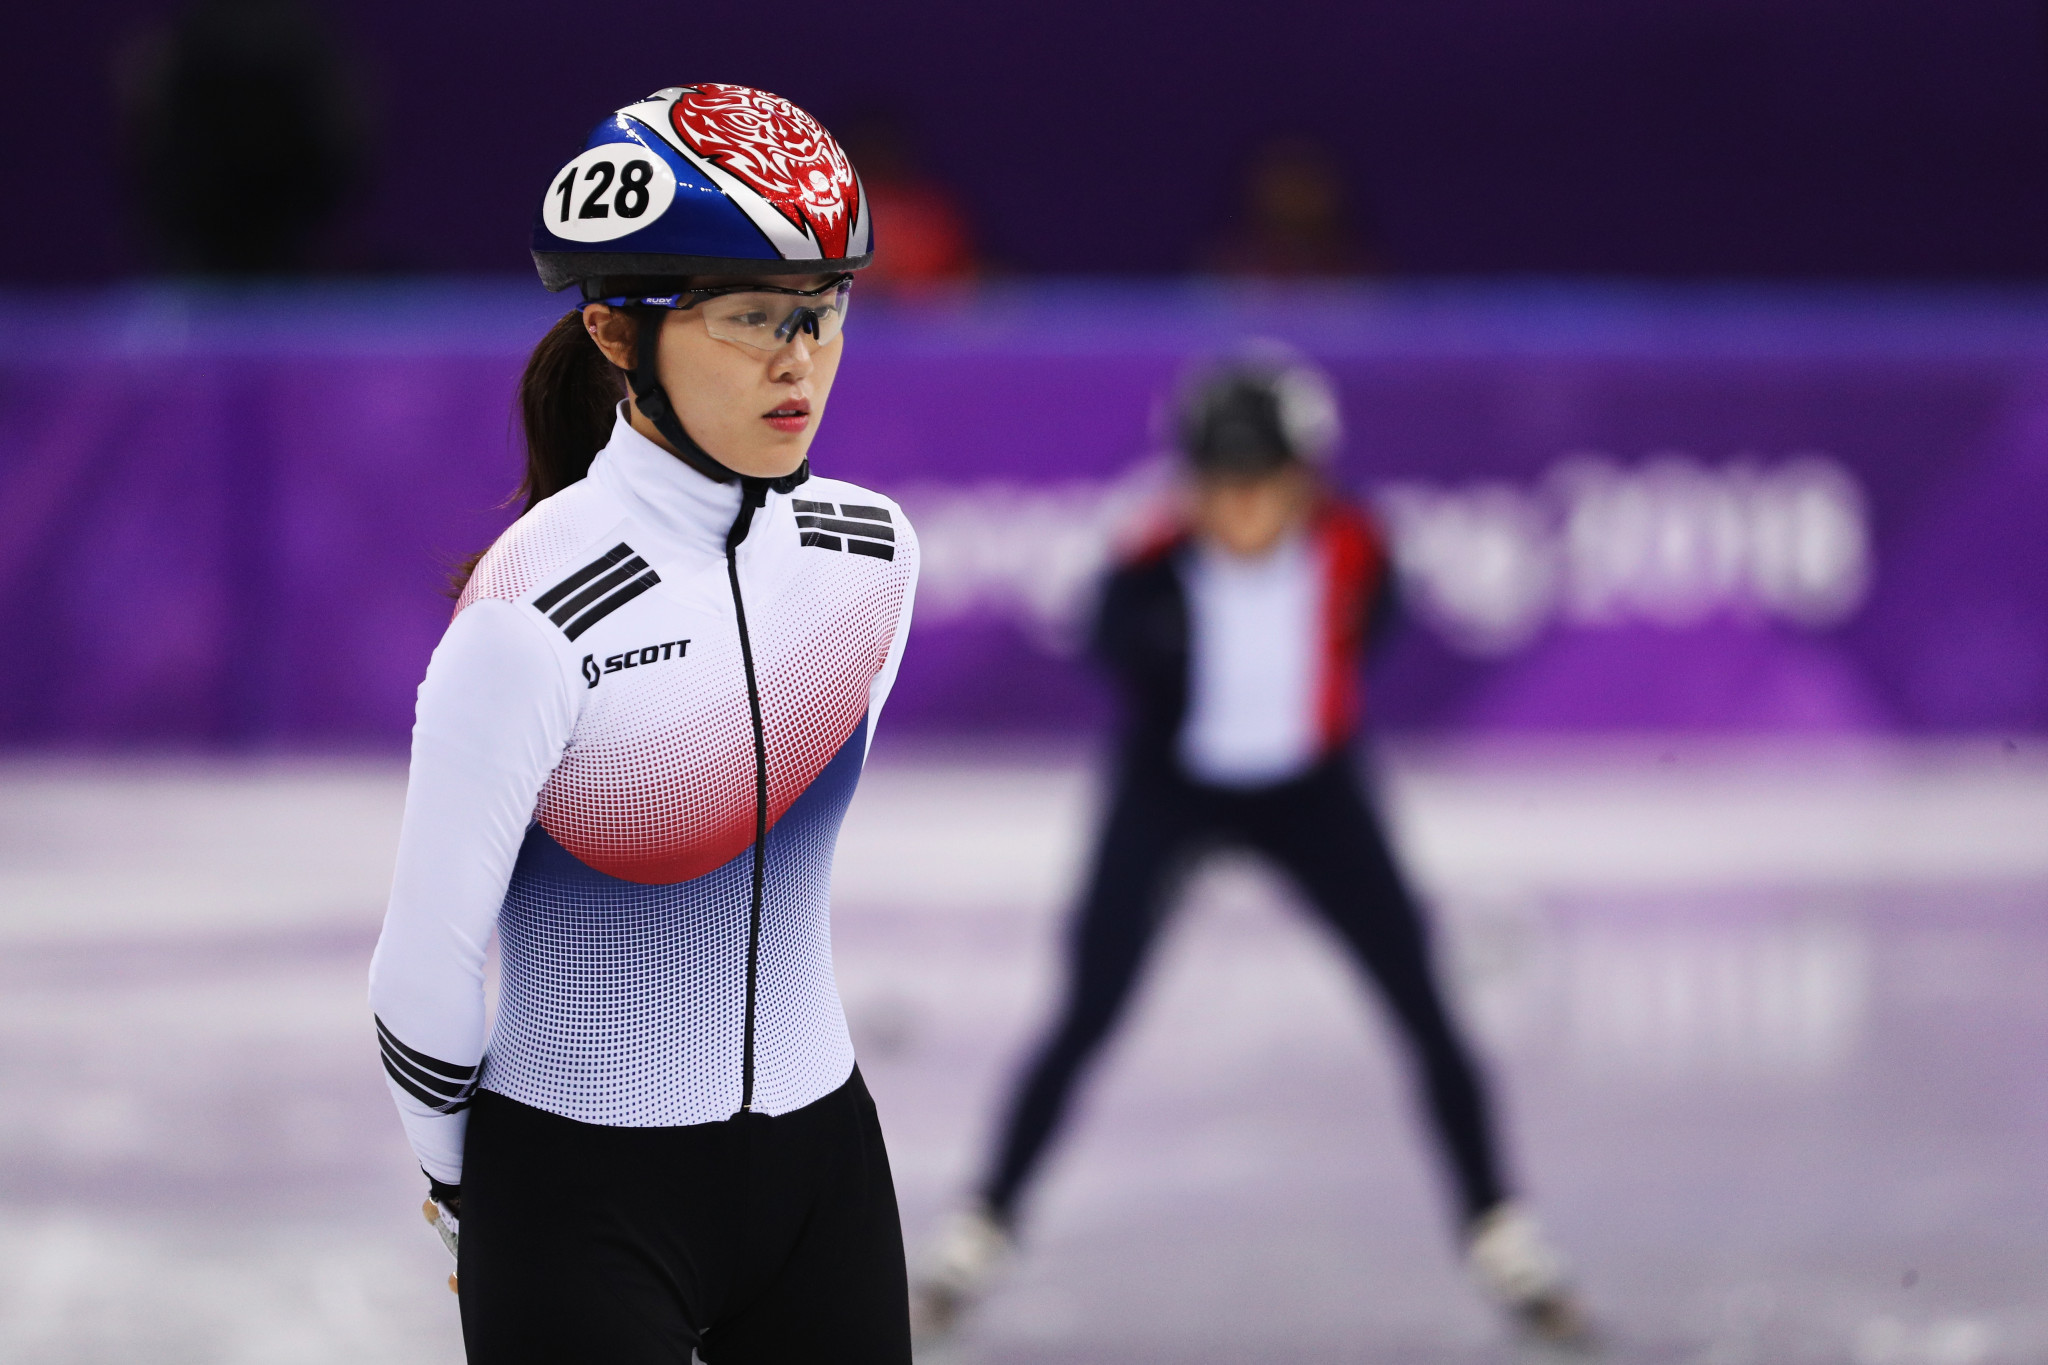 Kim A-lang will carry South Korea's flag at the Beijing 2022 Opening Ceremony after Kim Min-sun turned down the opportunity ©Getty Images